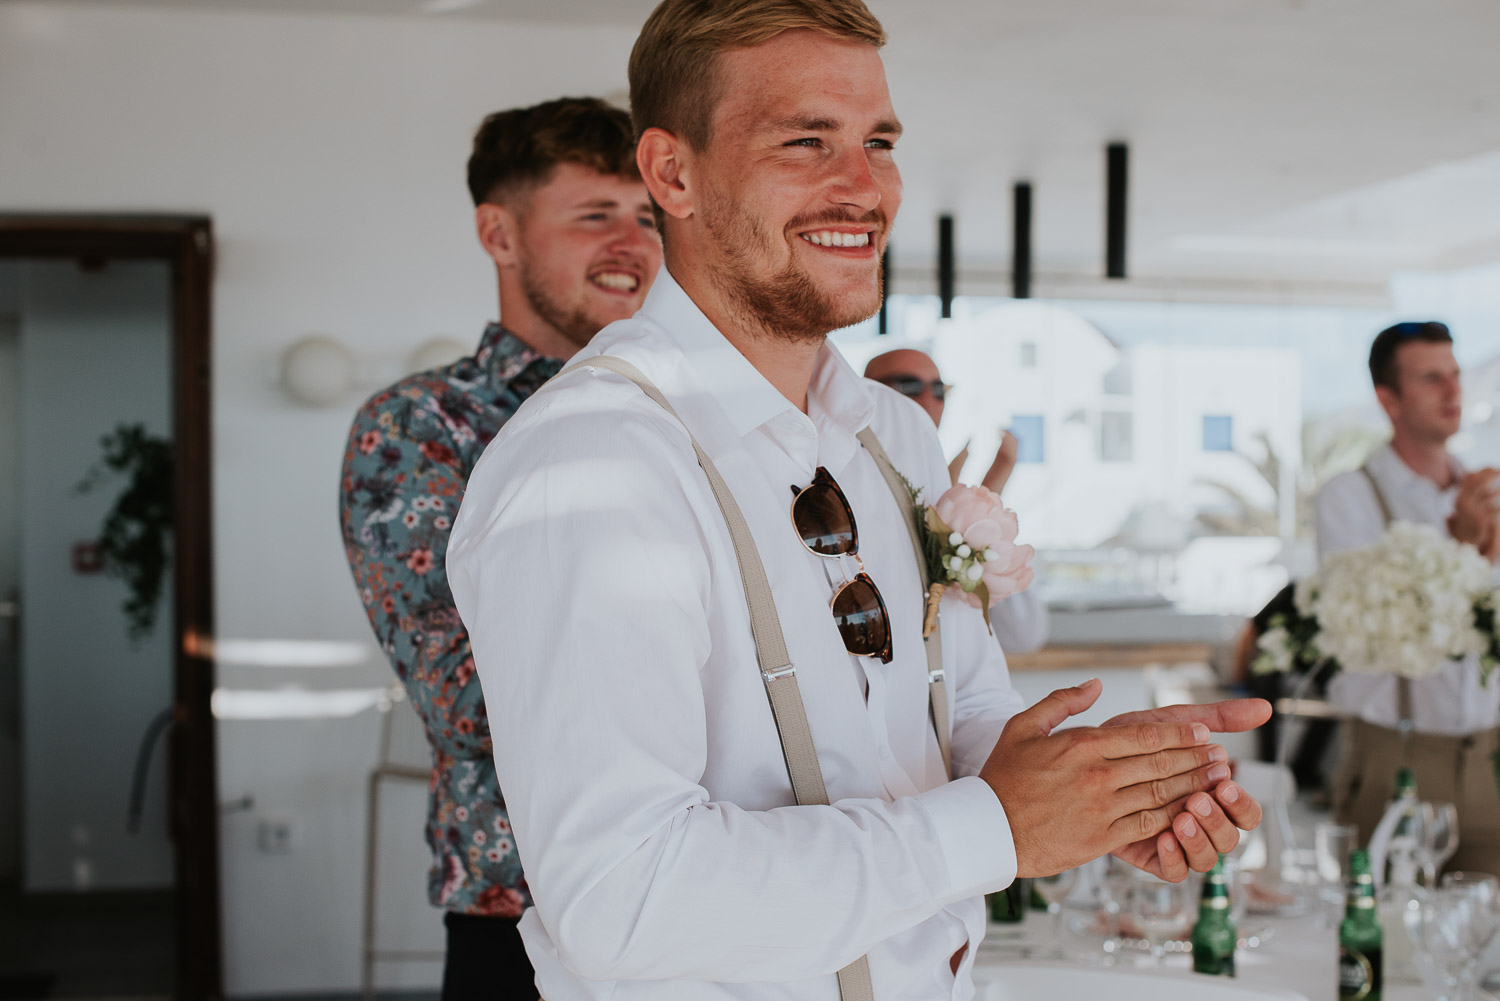 Wedding photographer Santorini: close up of guests smiling and clapping as bride and groom enter by Ben and Vesna.